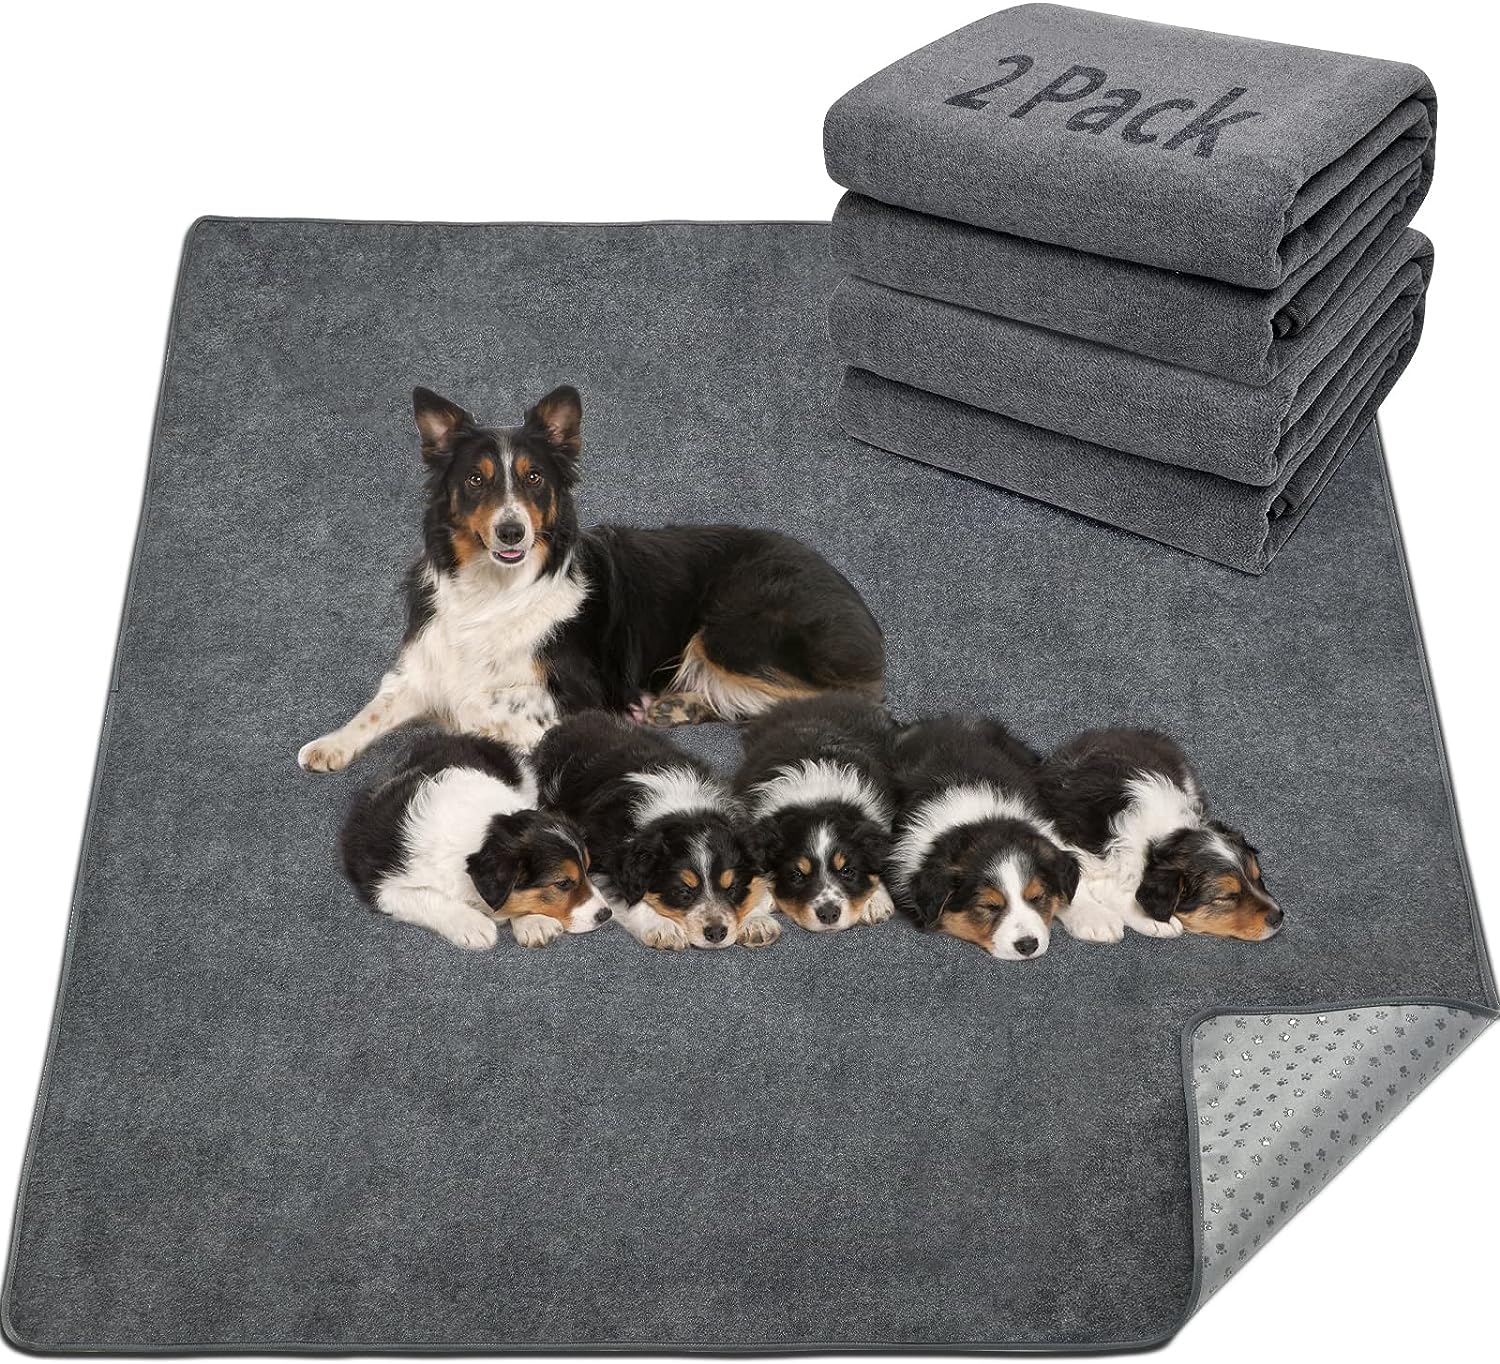 LOOBANI 2 Packs Extra Large Reusable Dog Mat for Floor NonSlip Washable Pee Pads for Dogs Fast Absorbent Pet Whelping Pads Puppy Playpen Mat for Incontinence Housebreak Crate 36x48Gray